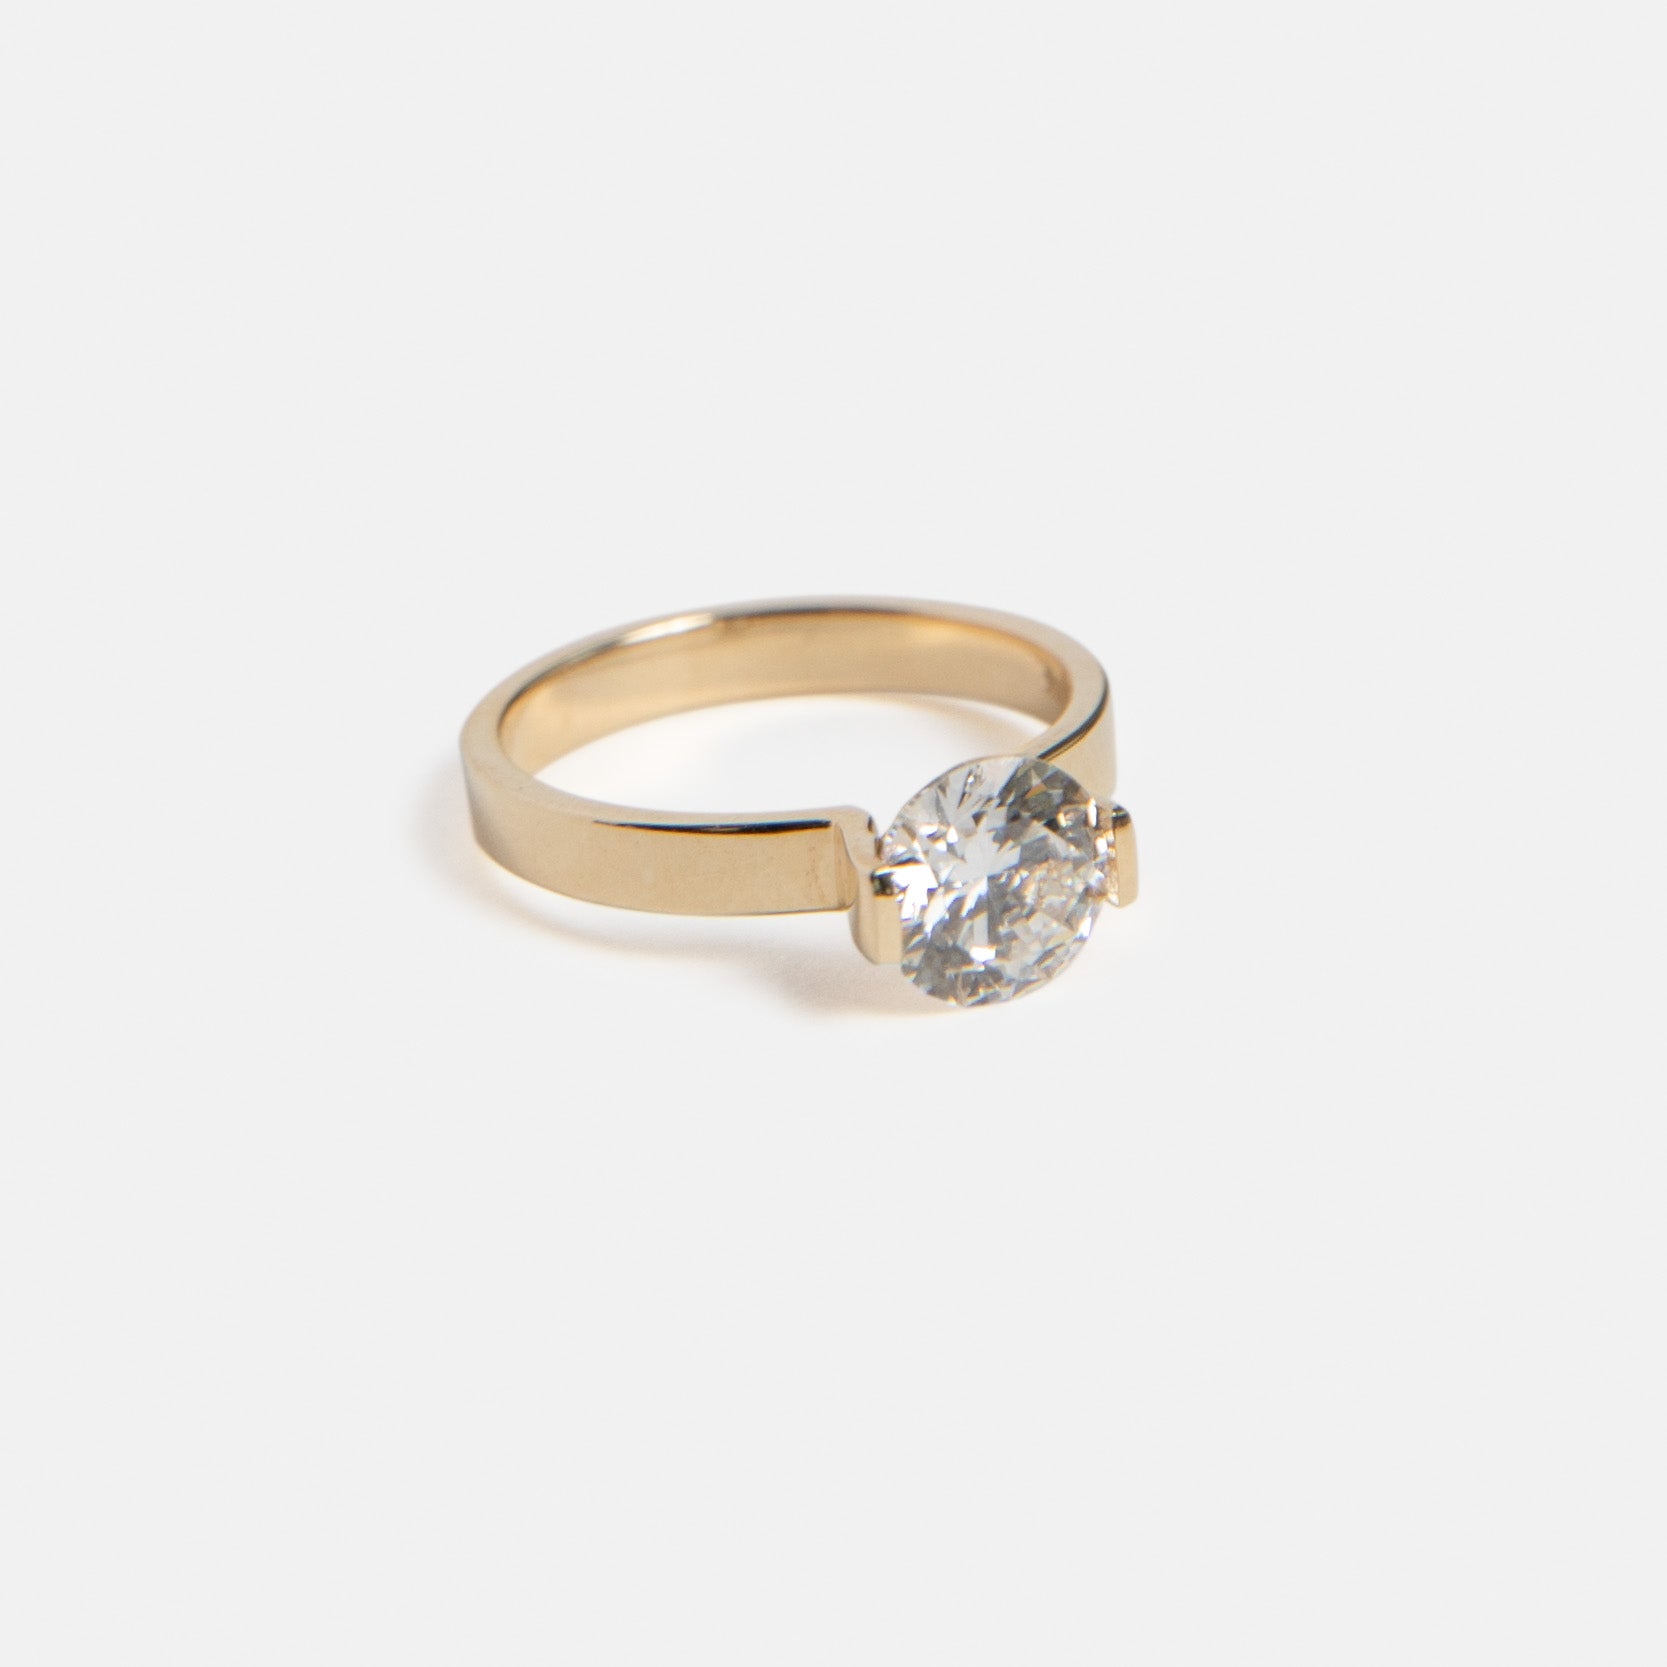 Lara Minimalist Ring in 14k Gold set with a 1.5ct emerald lab-grown diamond By SHW Fine Jewelry NYC